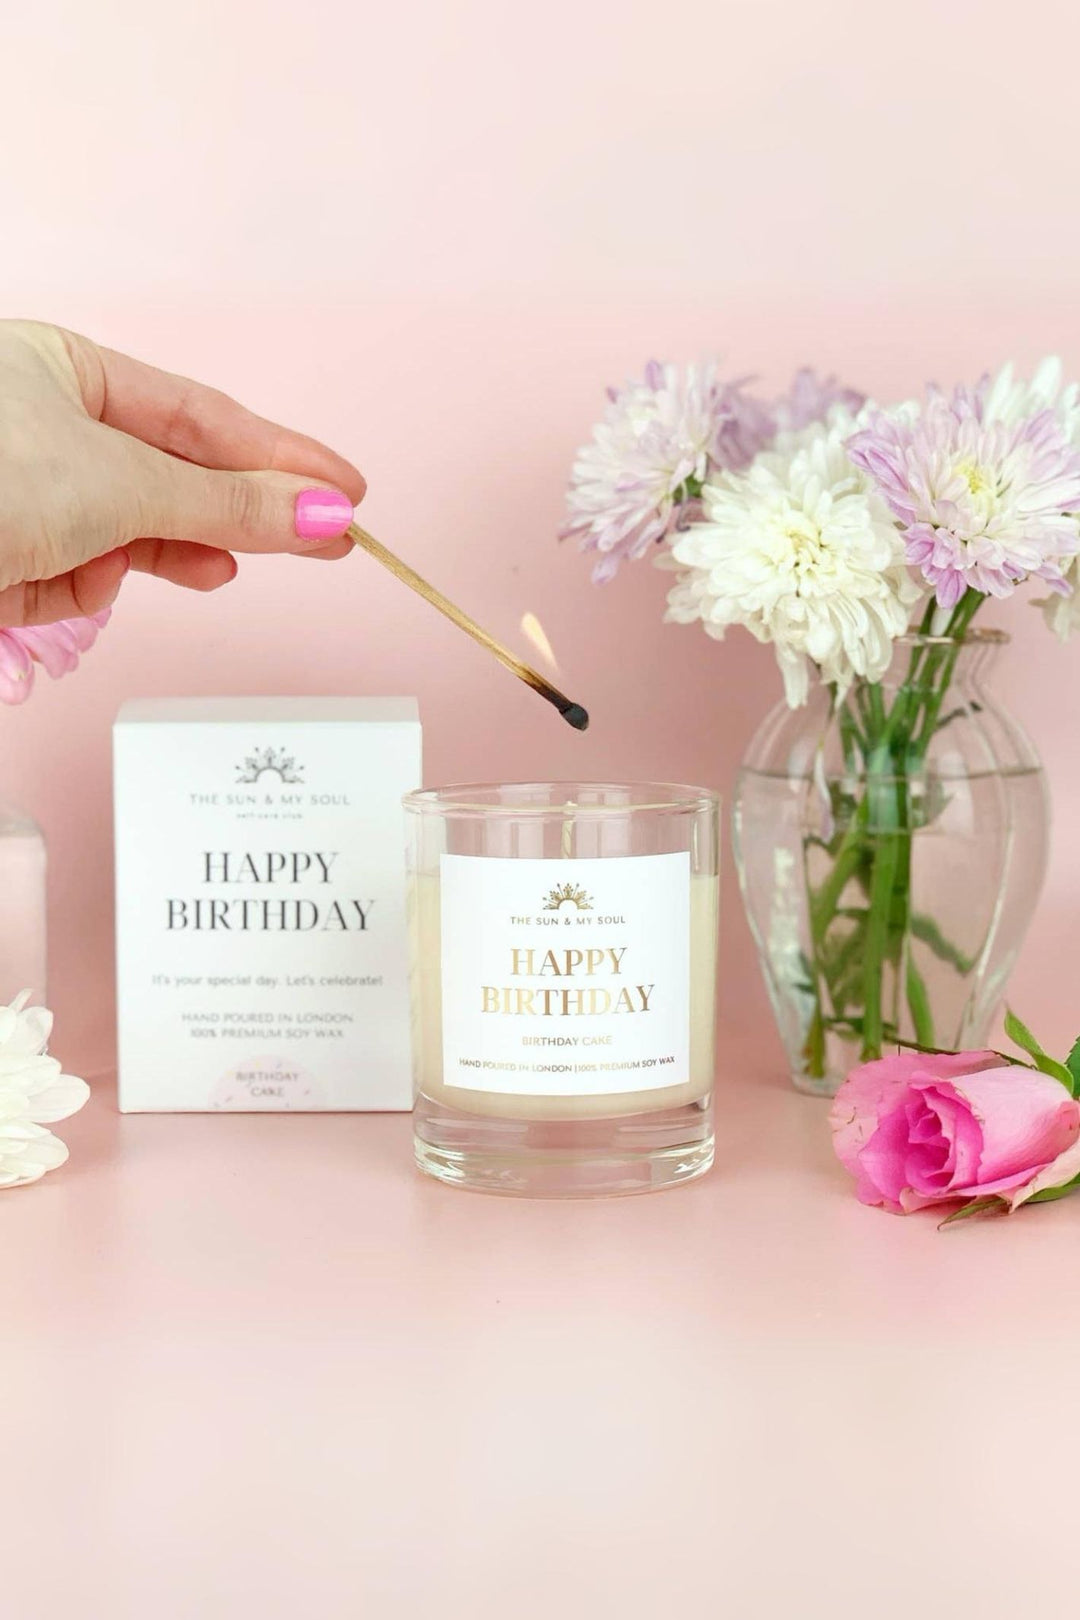 Happy Birthday -Birthday Cake Scented Soy Candle in Gift Box